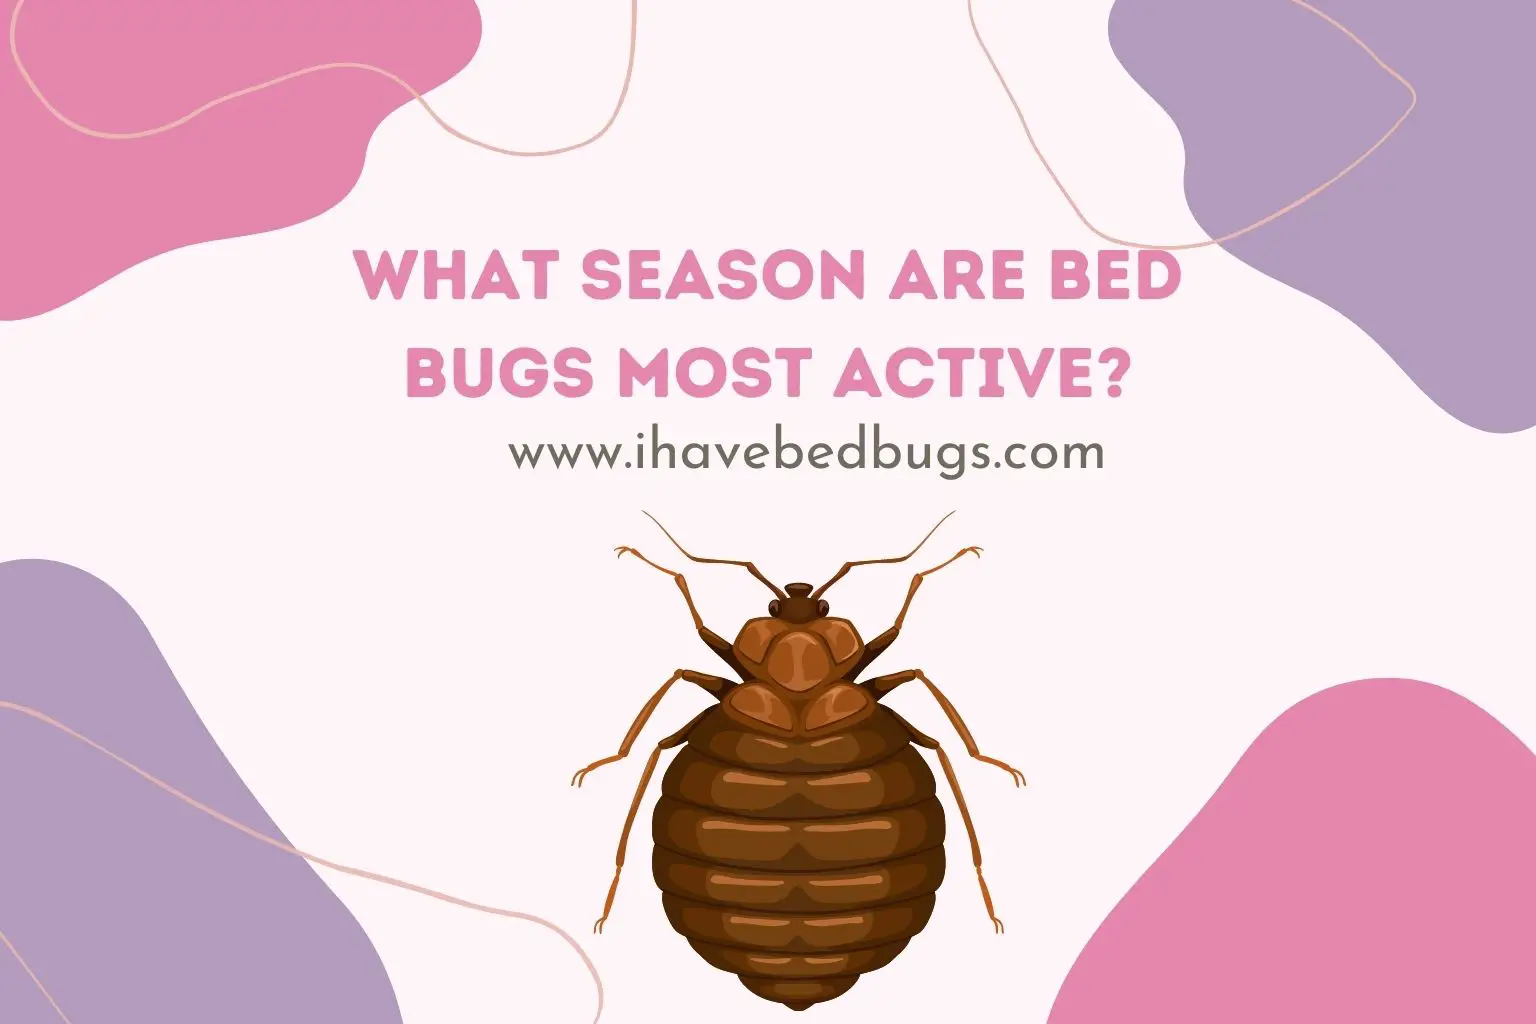 What season are bed bugs most active